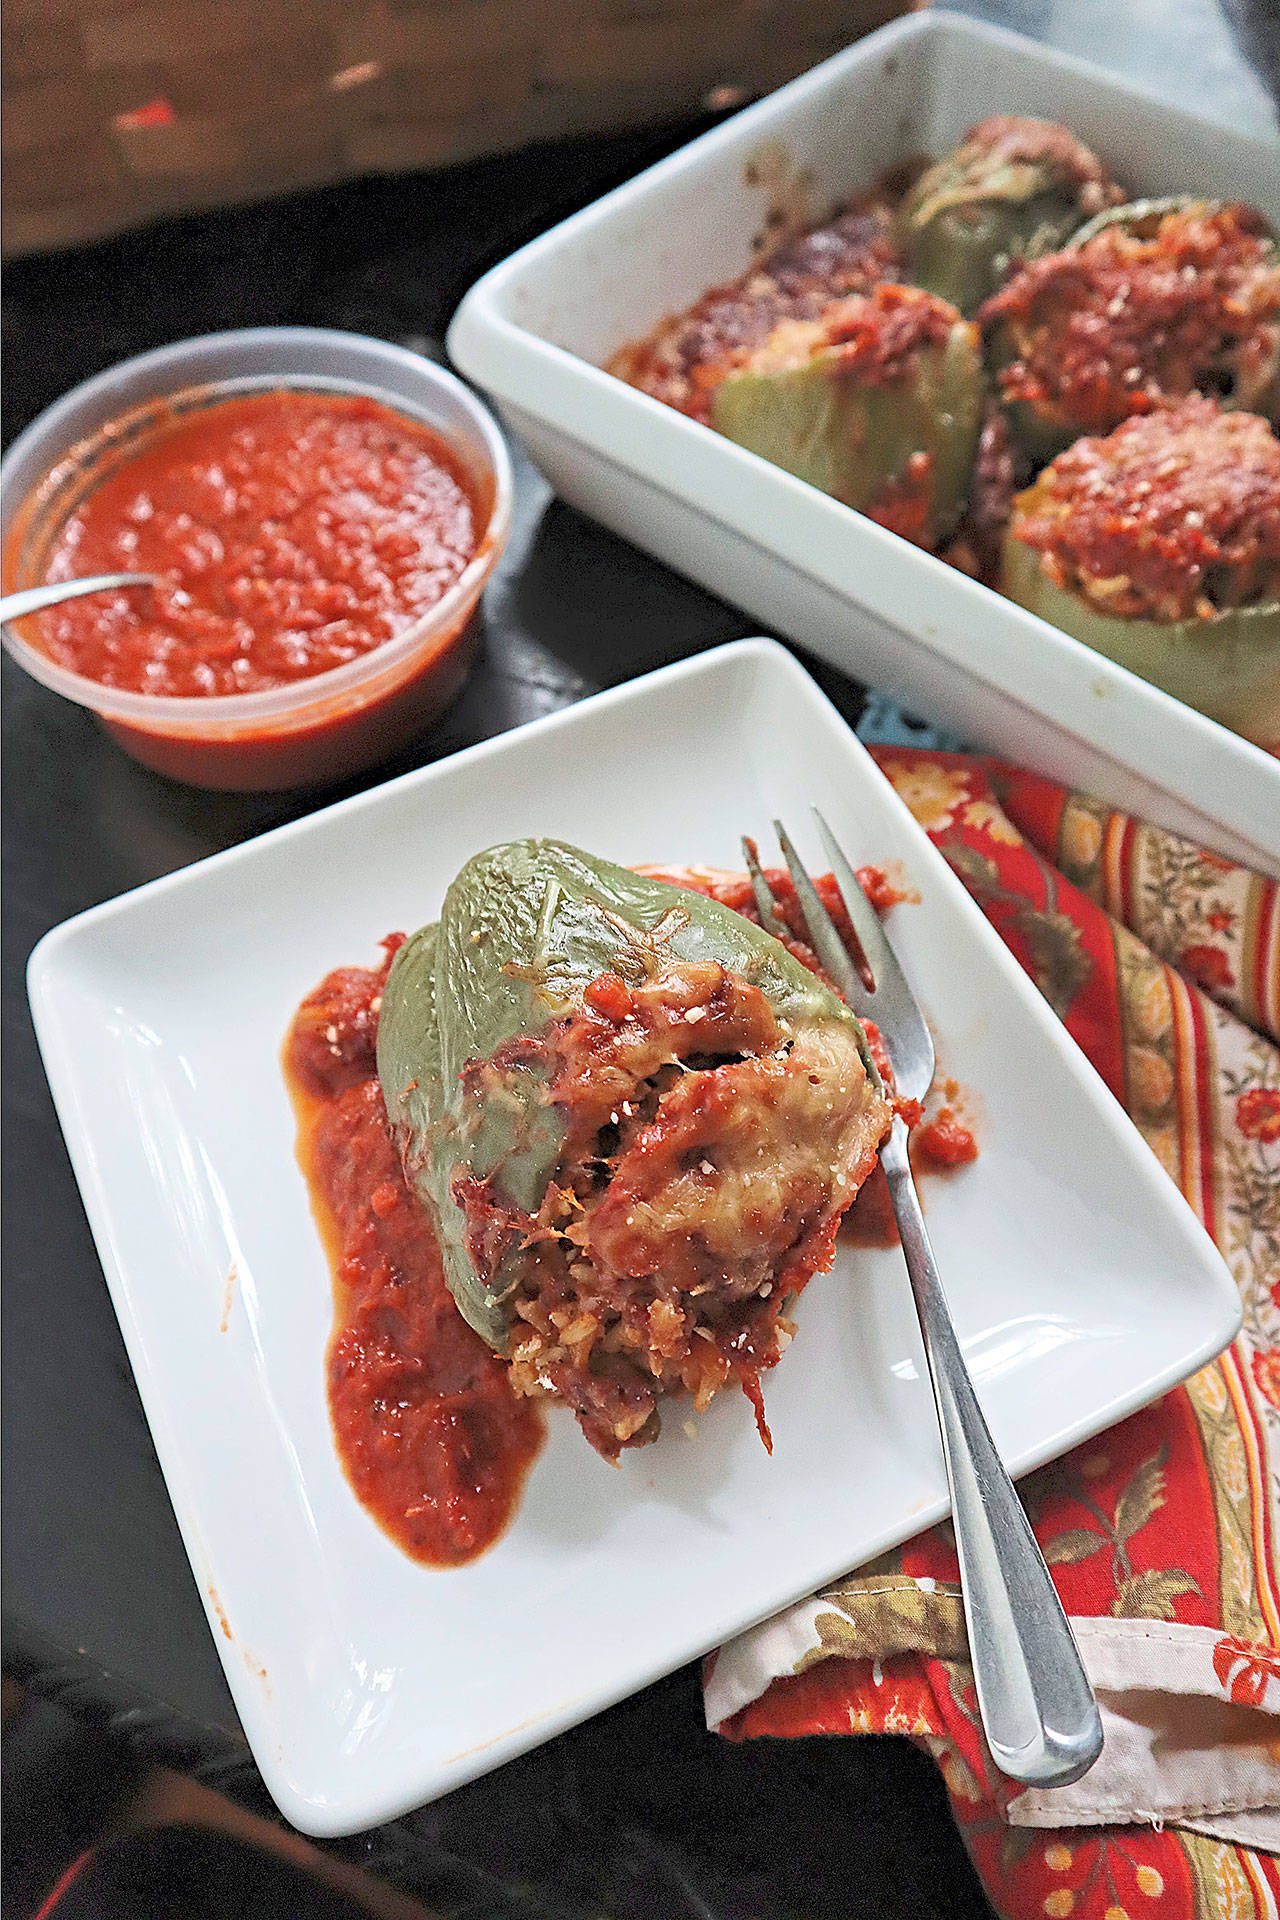 Bell peppers stuffed with a cheesy mixture of sweet Italian sausage, brown rice and Parmesan cheese make a hearty fall meal. (Gretchen McKay / Pittsburgh Post-Gazette)